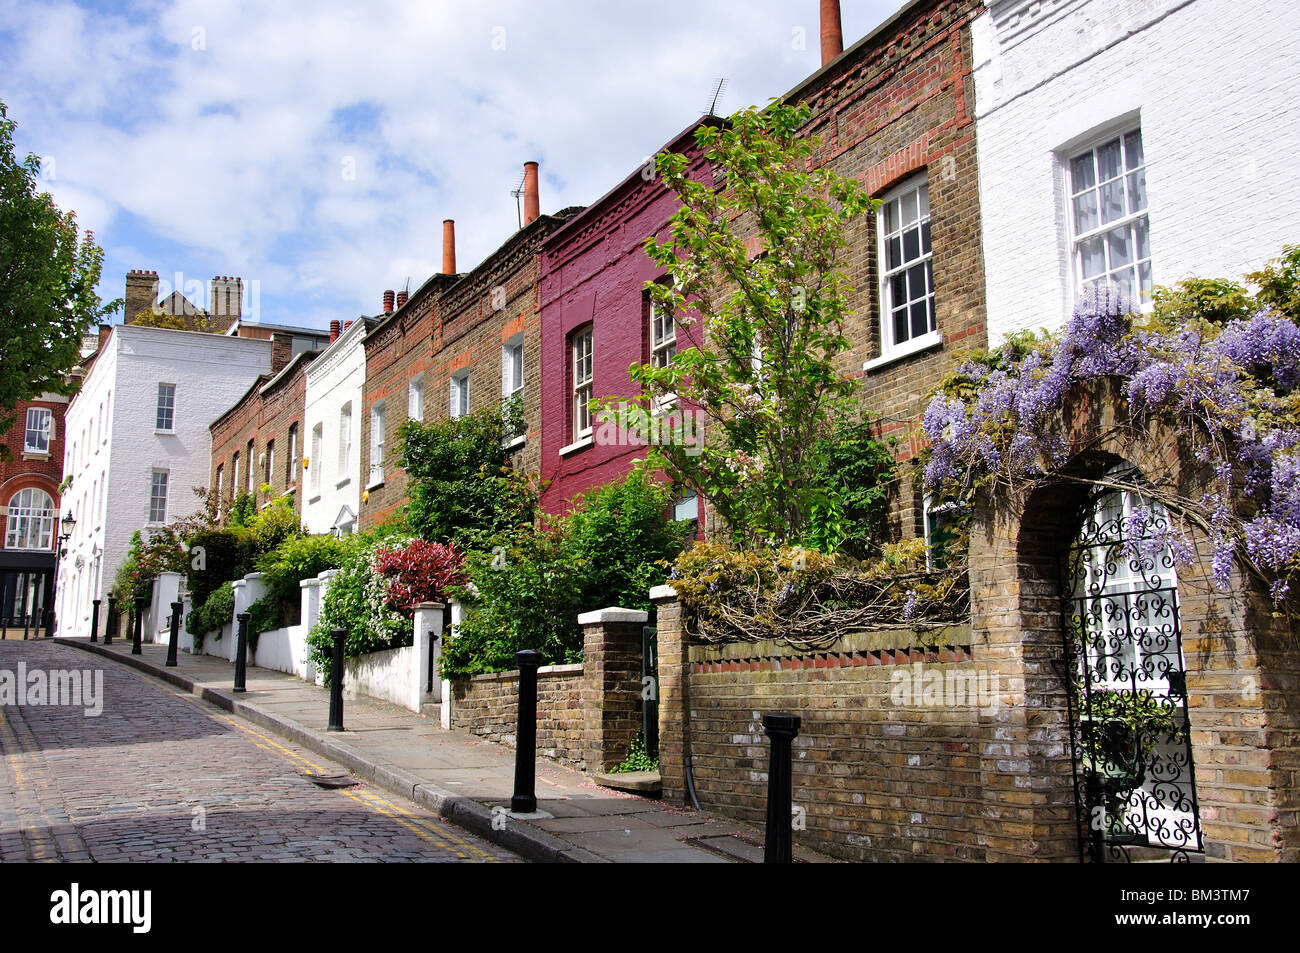 Ruelle, Hampstead, London Borough of Camden, Greater London, Angleterre, Royaume-Uni Banque D'Images